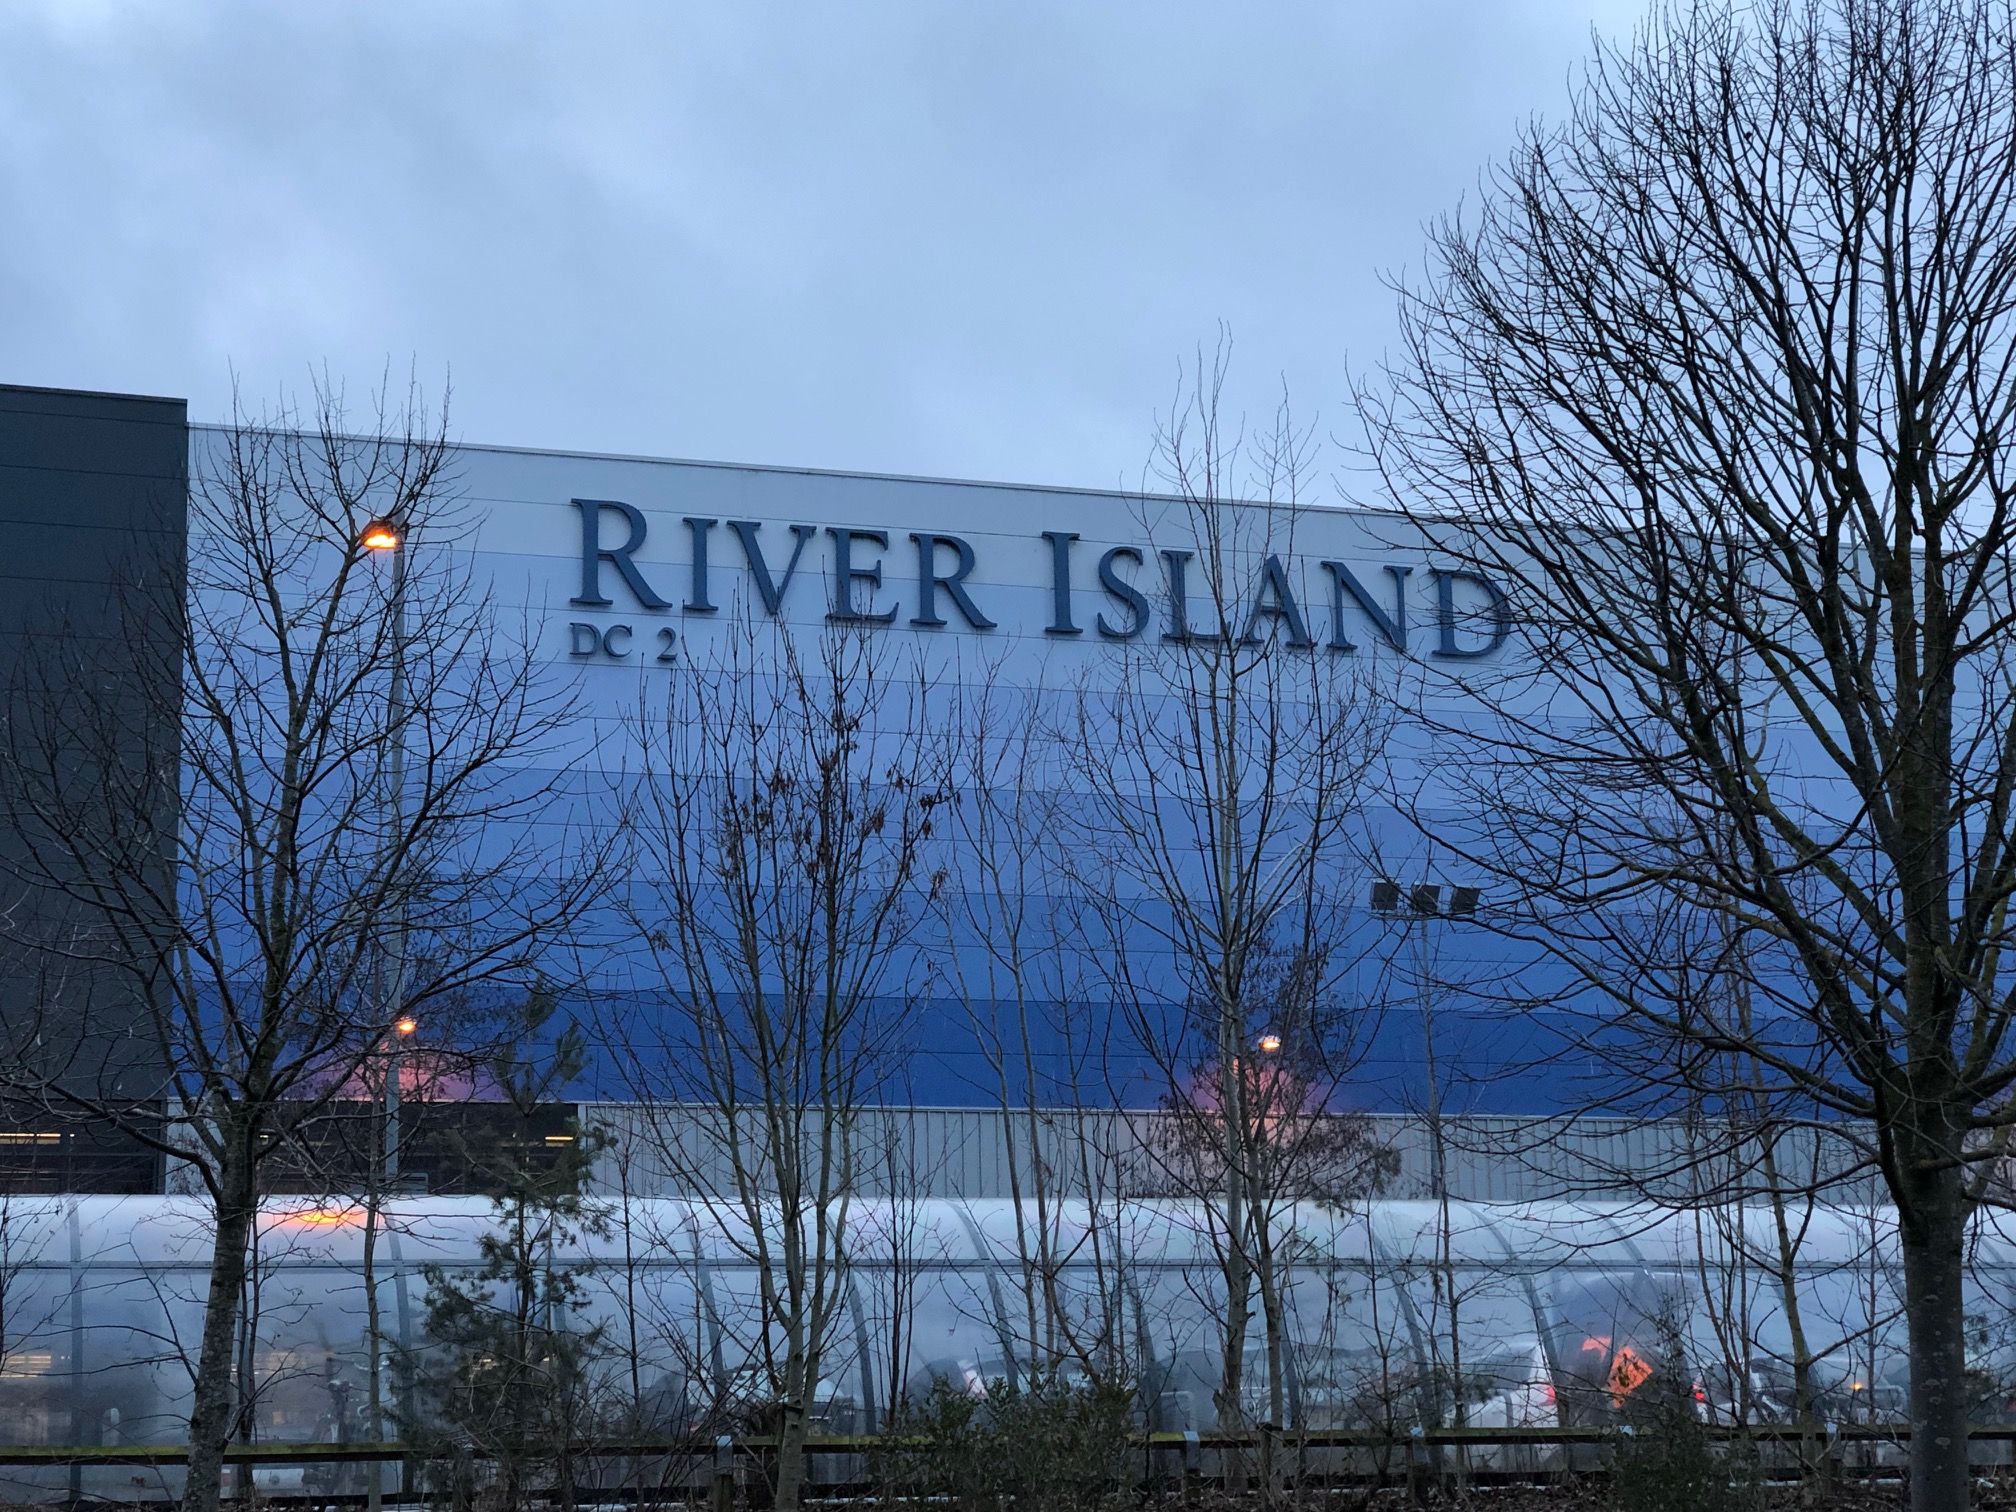 Our visit to the River Island warehouse - Cranfield University Blogs